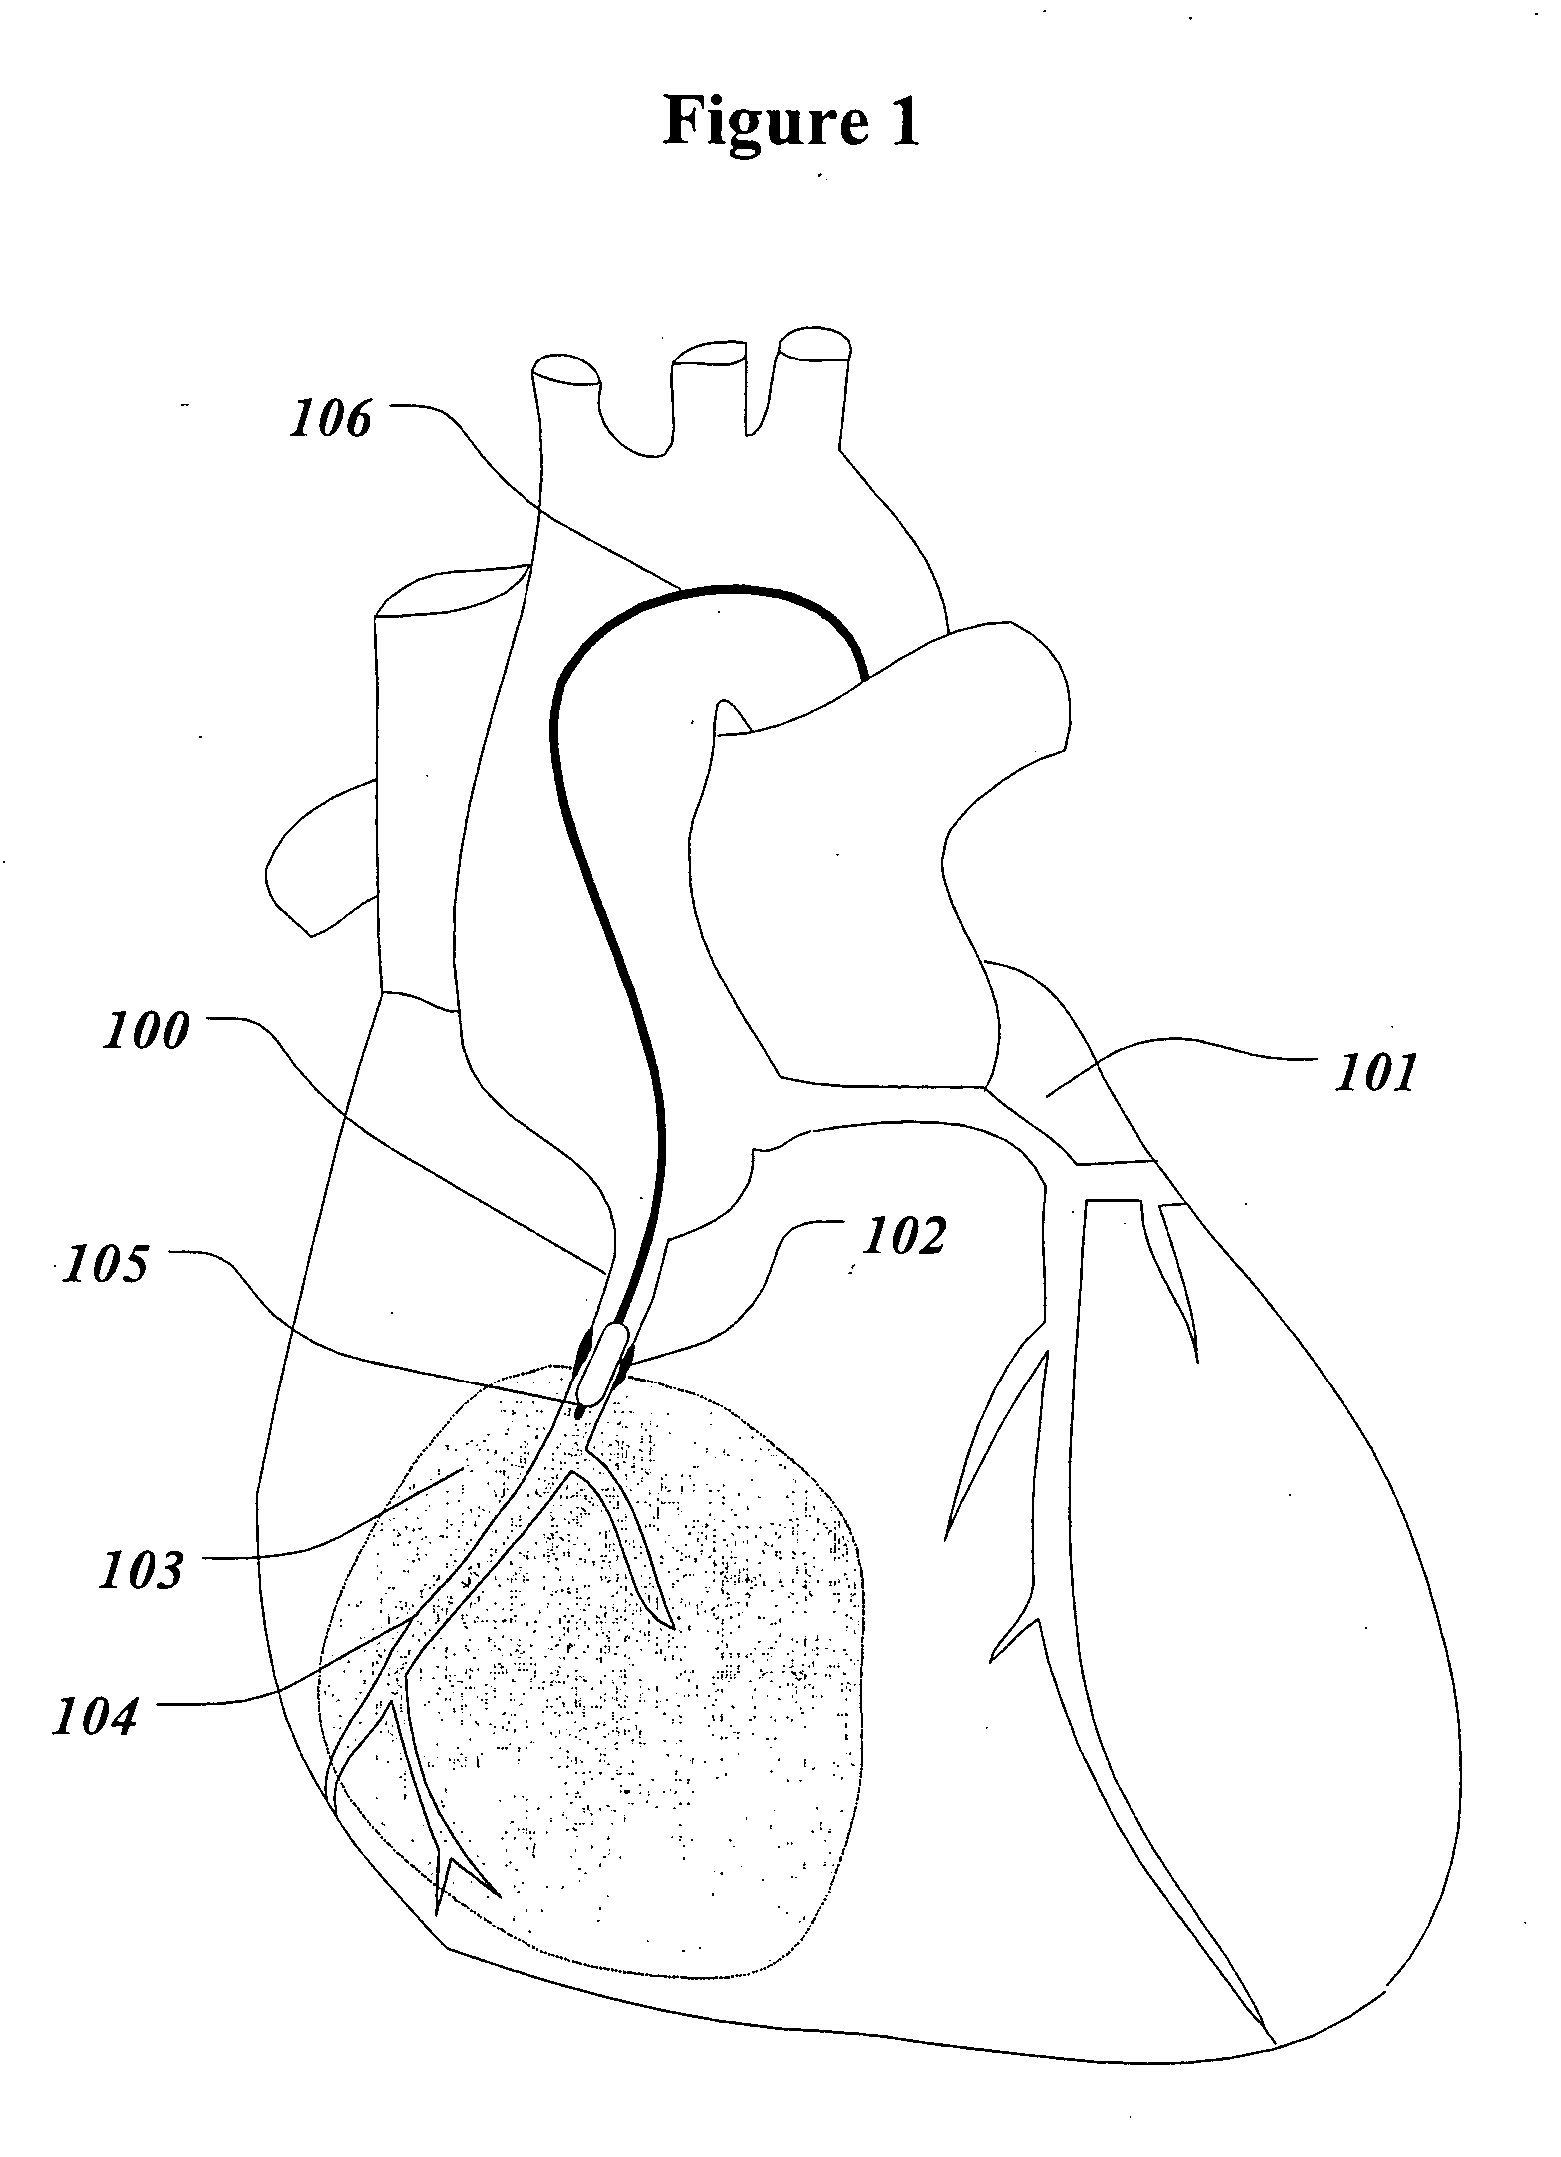 System and method for the treatment of reperfusion injury